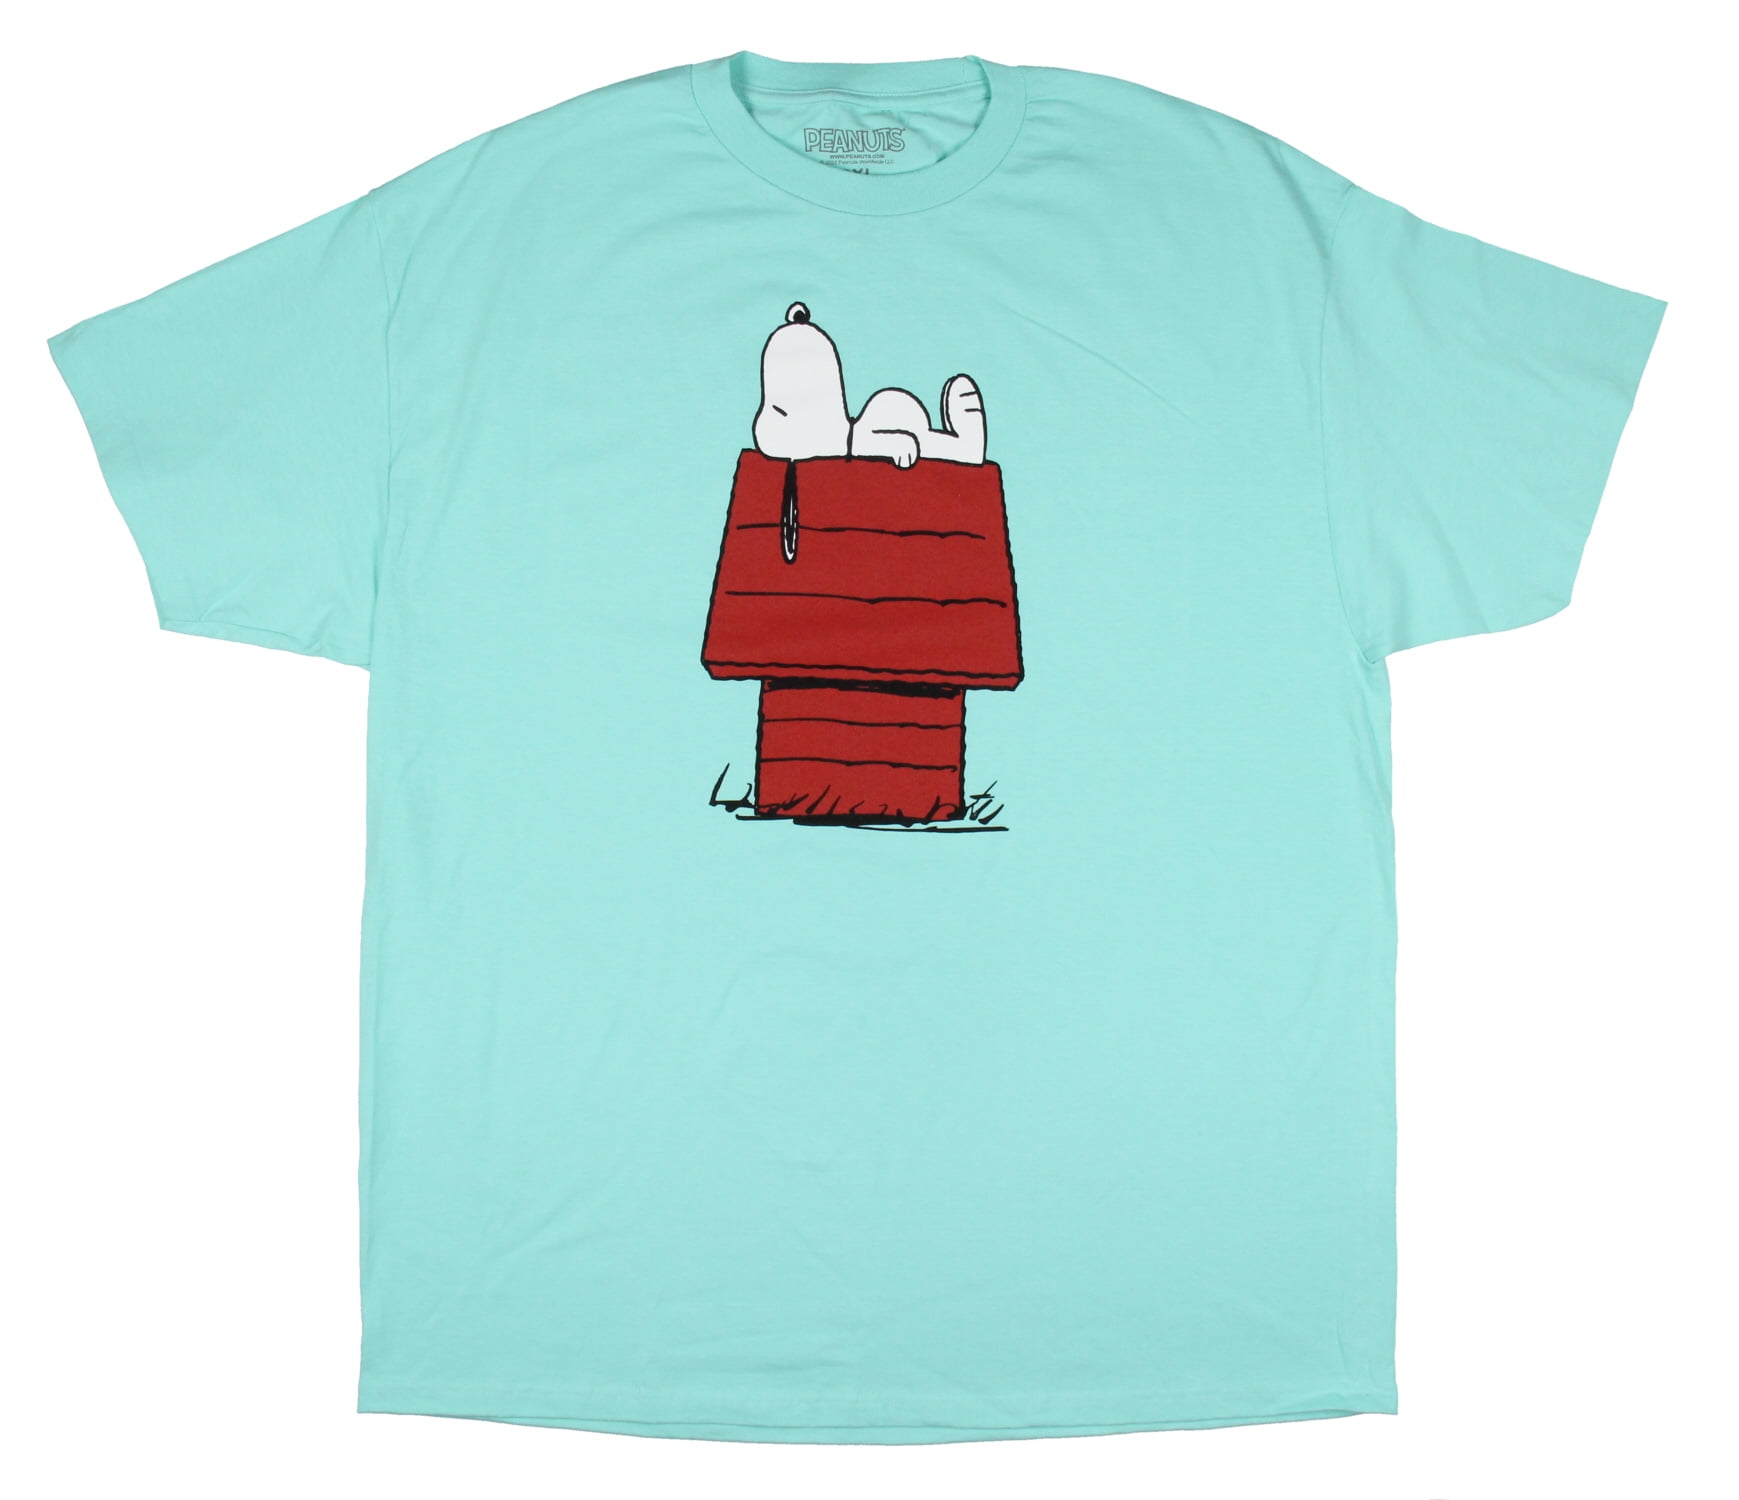 Peanuts Men's Snoopy Sleeping on Red Doghouse Graphic T-Shirt (Heather  Grey, Large)